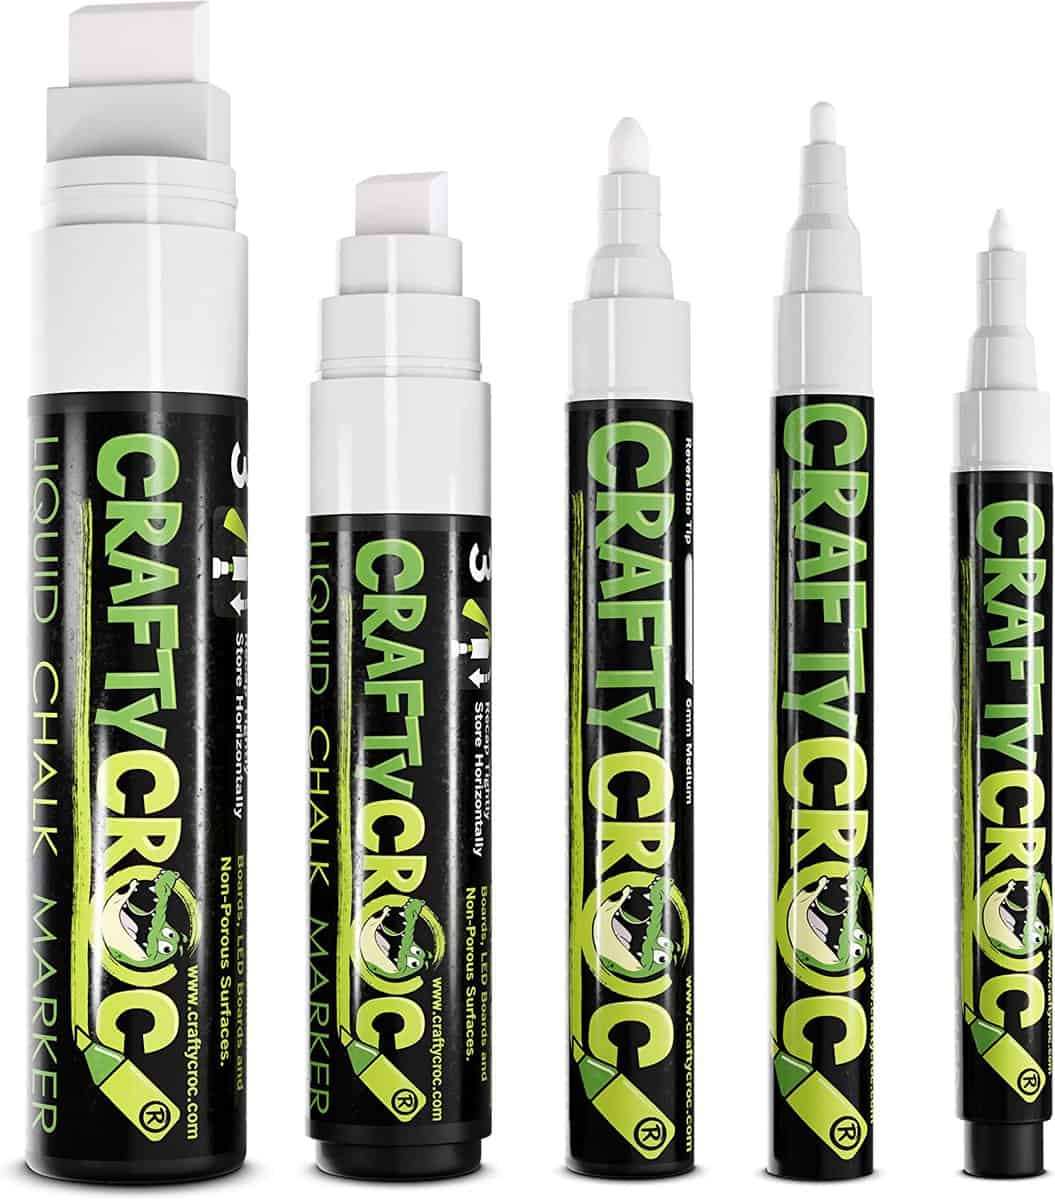 Cosco Chalk Marker, White, Green, Blue, Yellow, 4-Pack